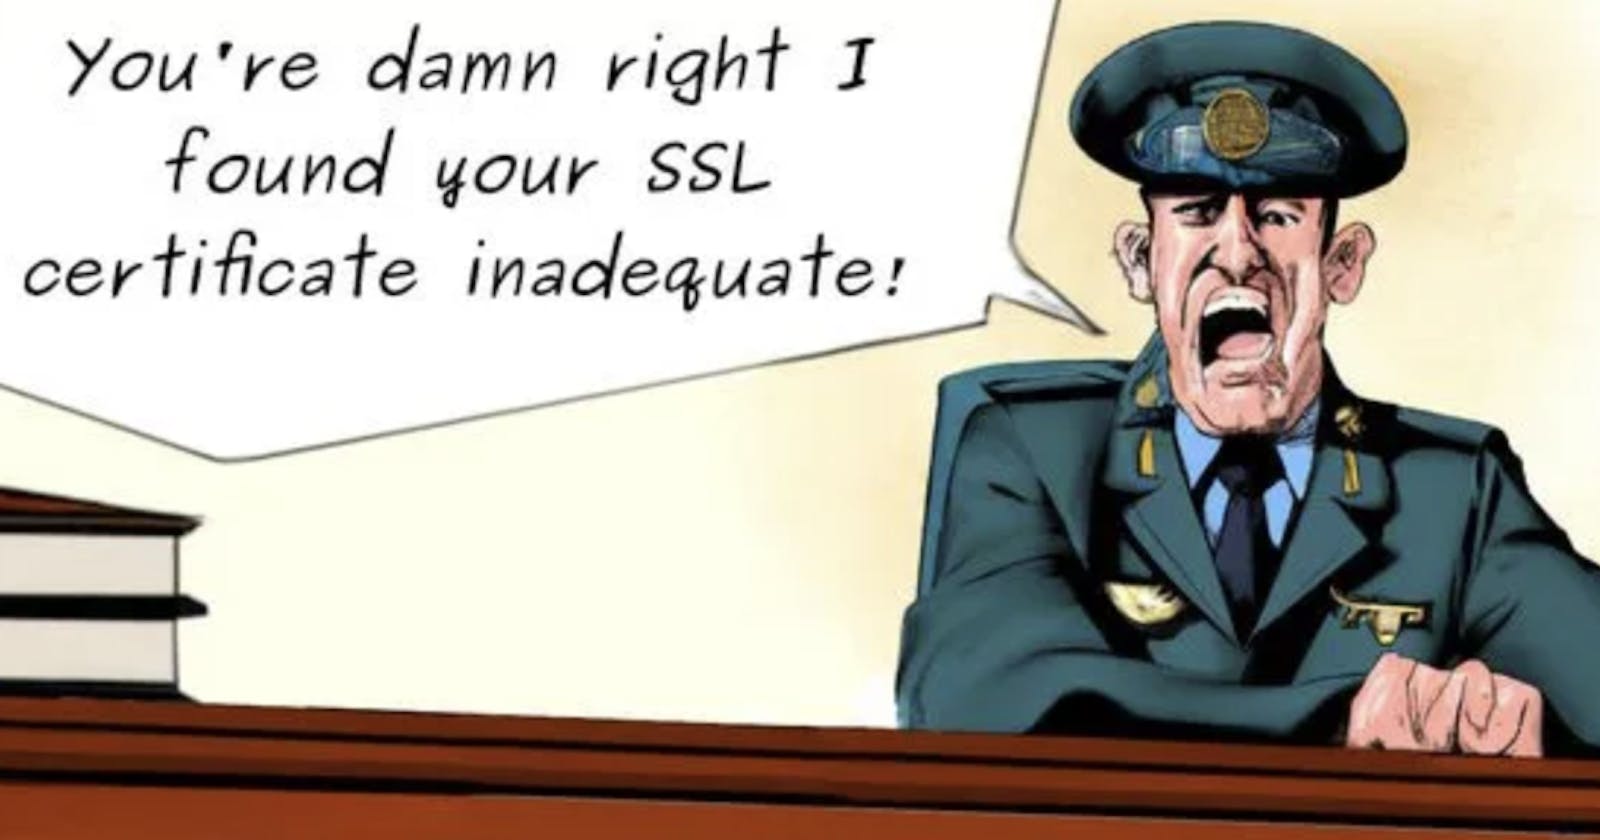 All you need to know about SSL/TLS certificates — PART 1